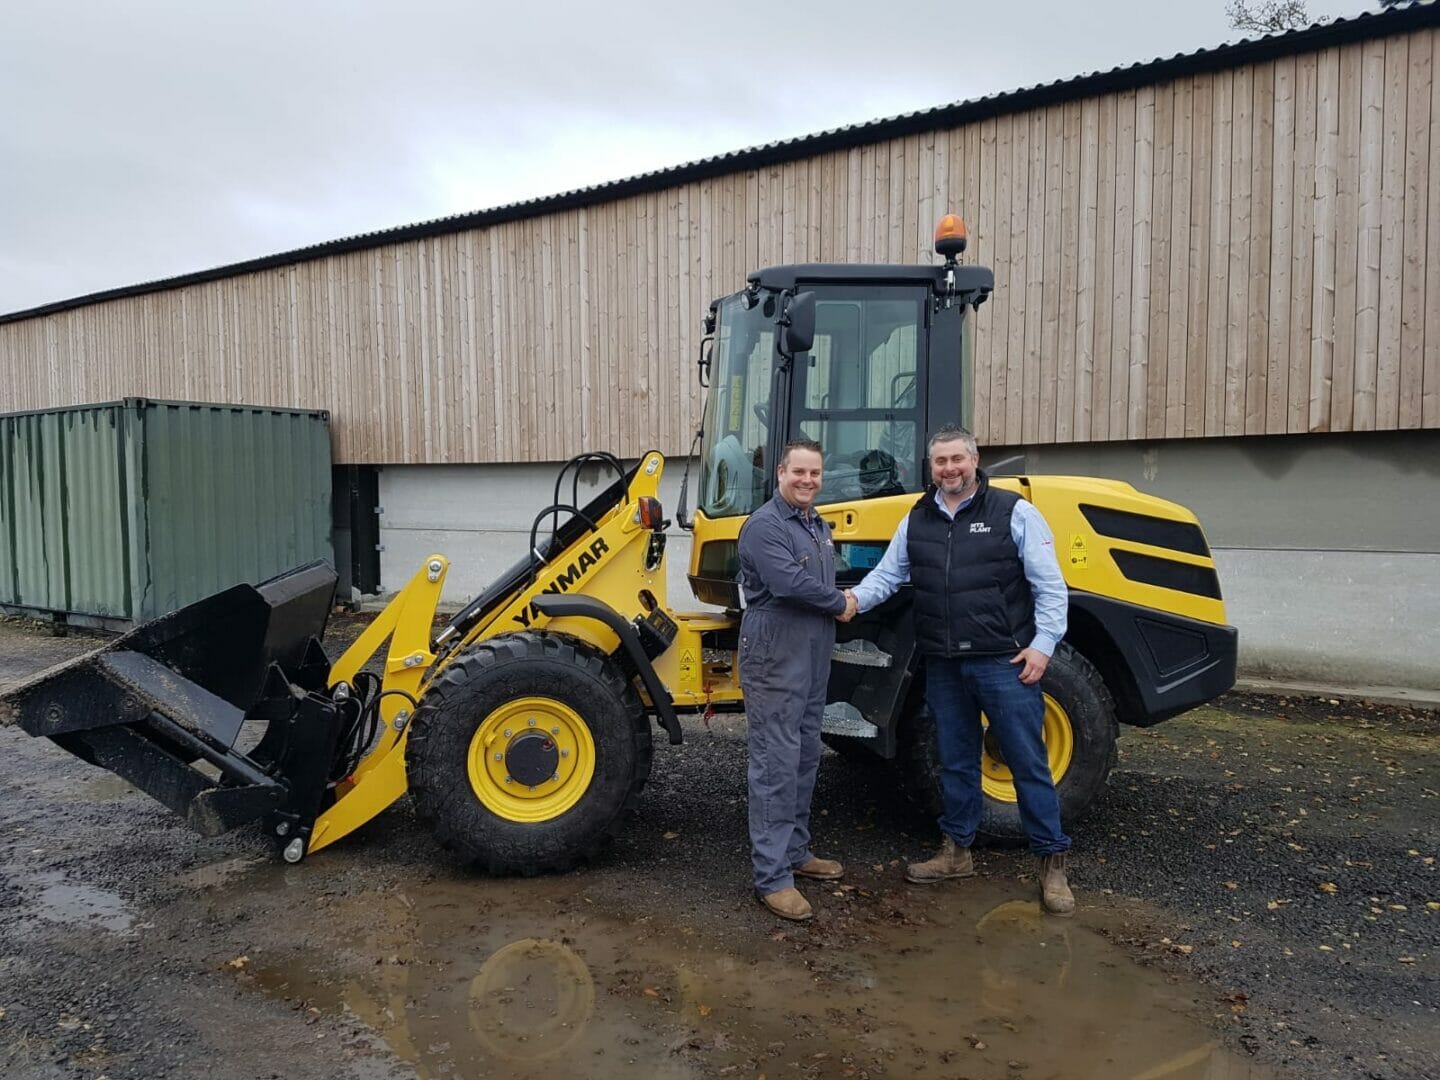 Masters Spreading acquires UK’s first Yanmar V80 wheel loader